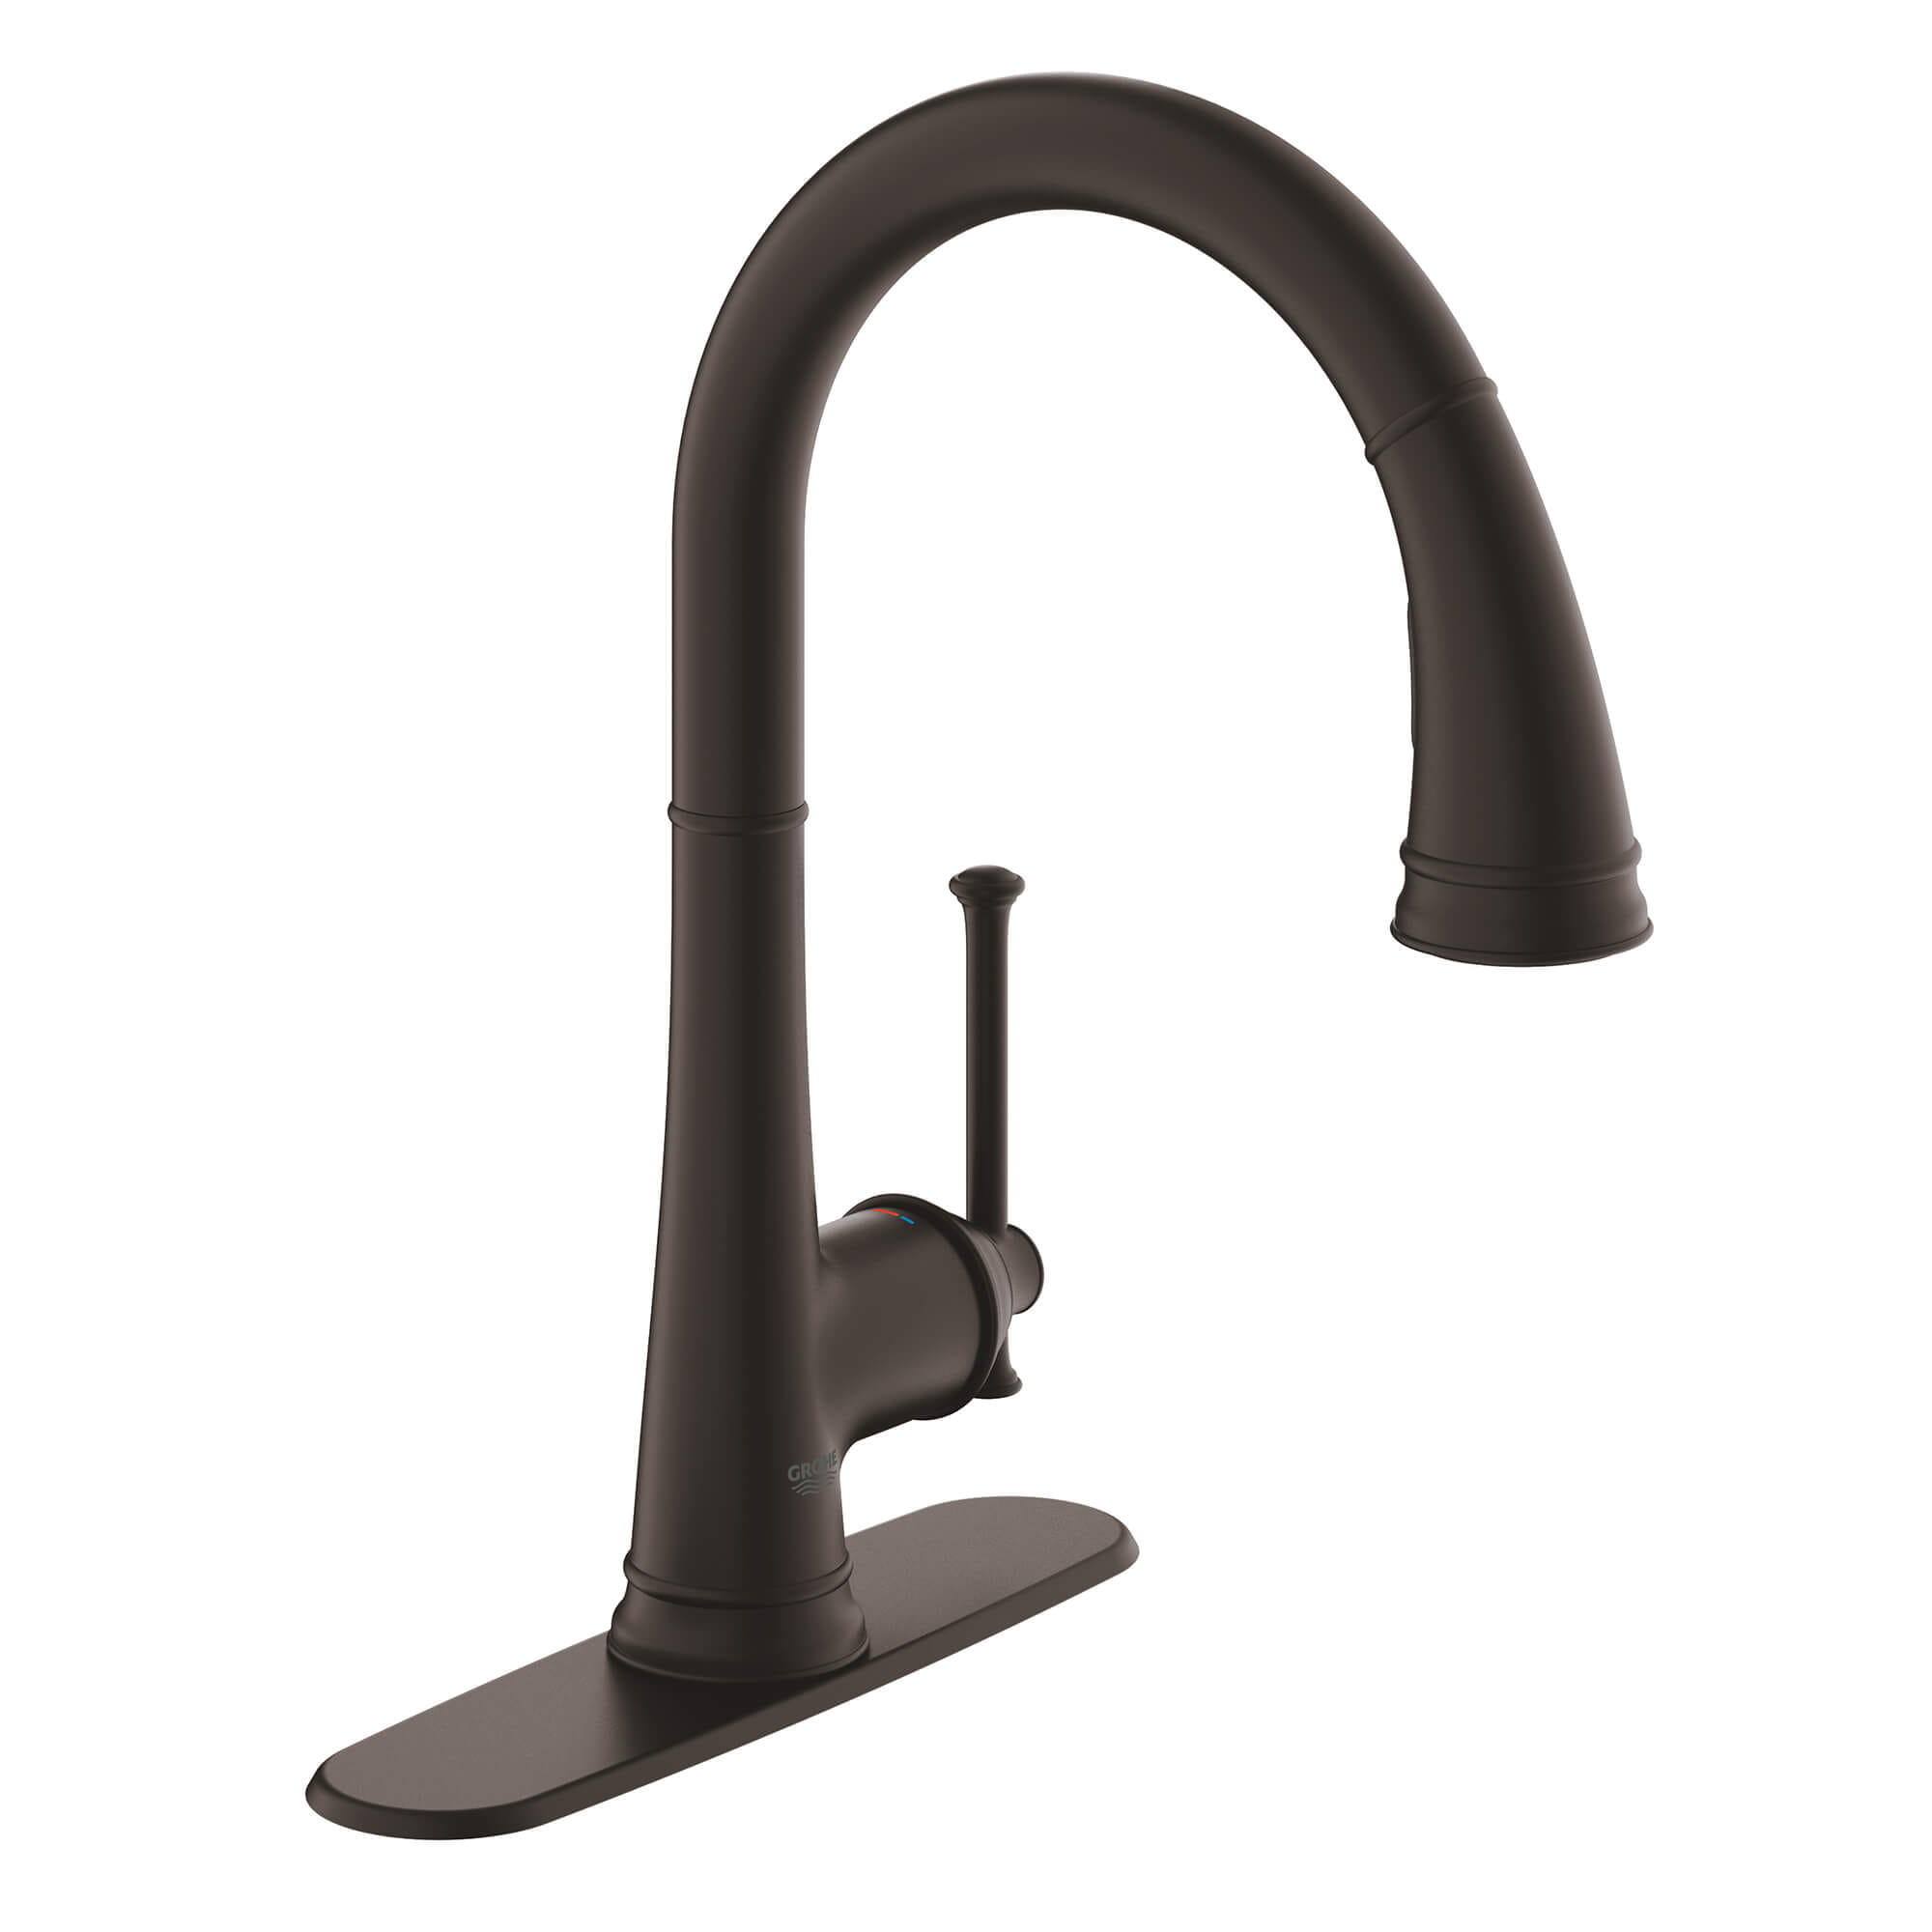 Single Handle Pull Down Kitchen Faucet Dual Spray 175 GPM GROHE ANTIQUE BRONZE